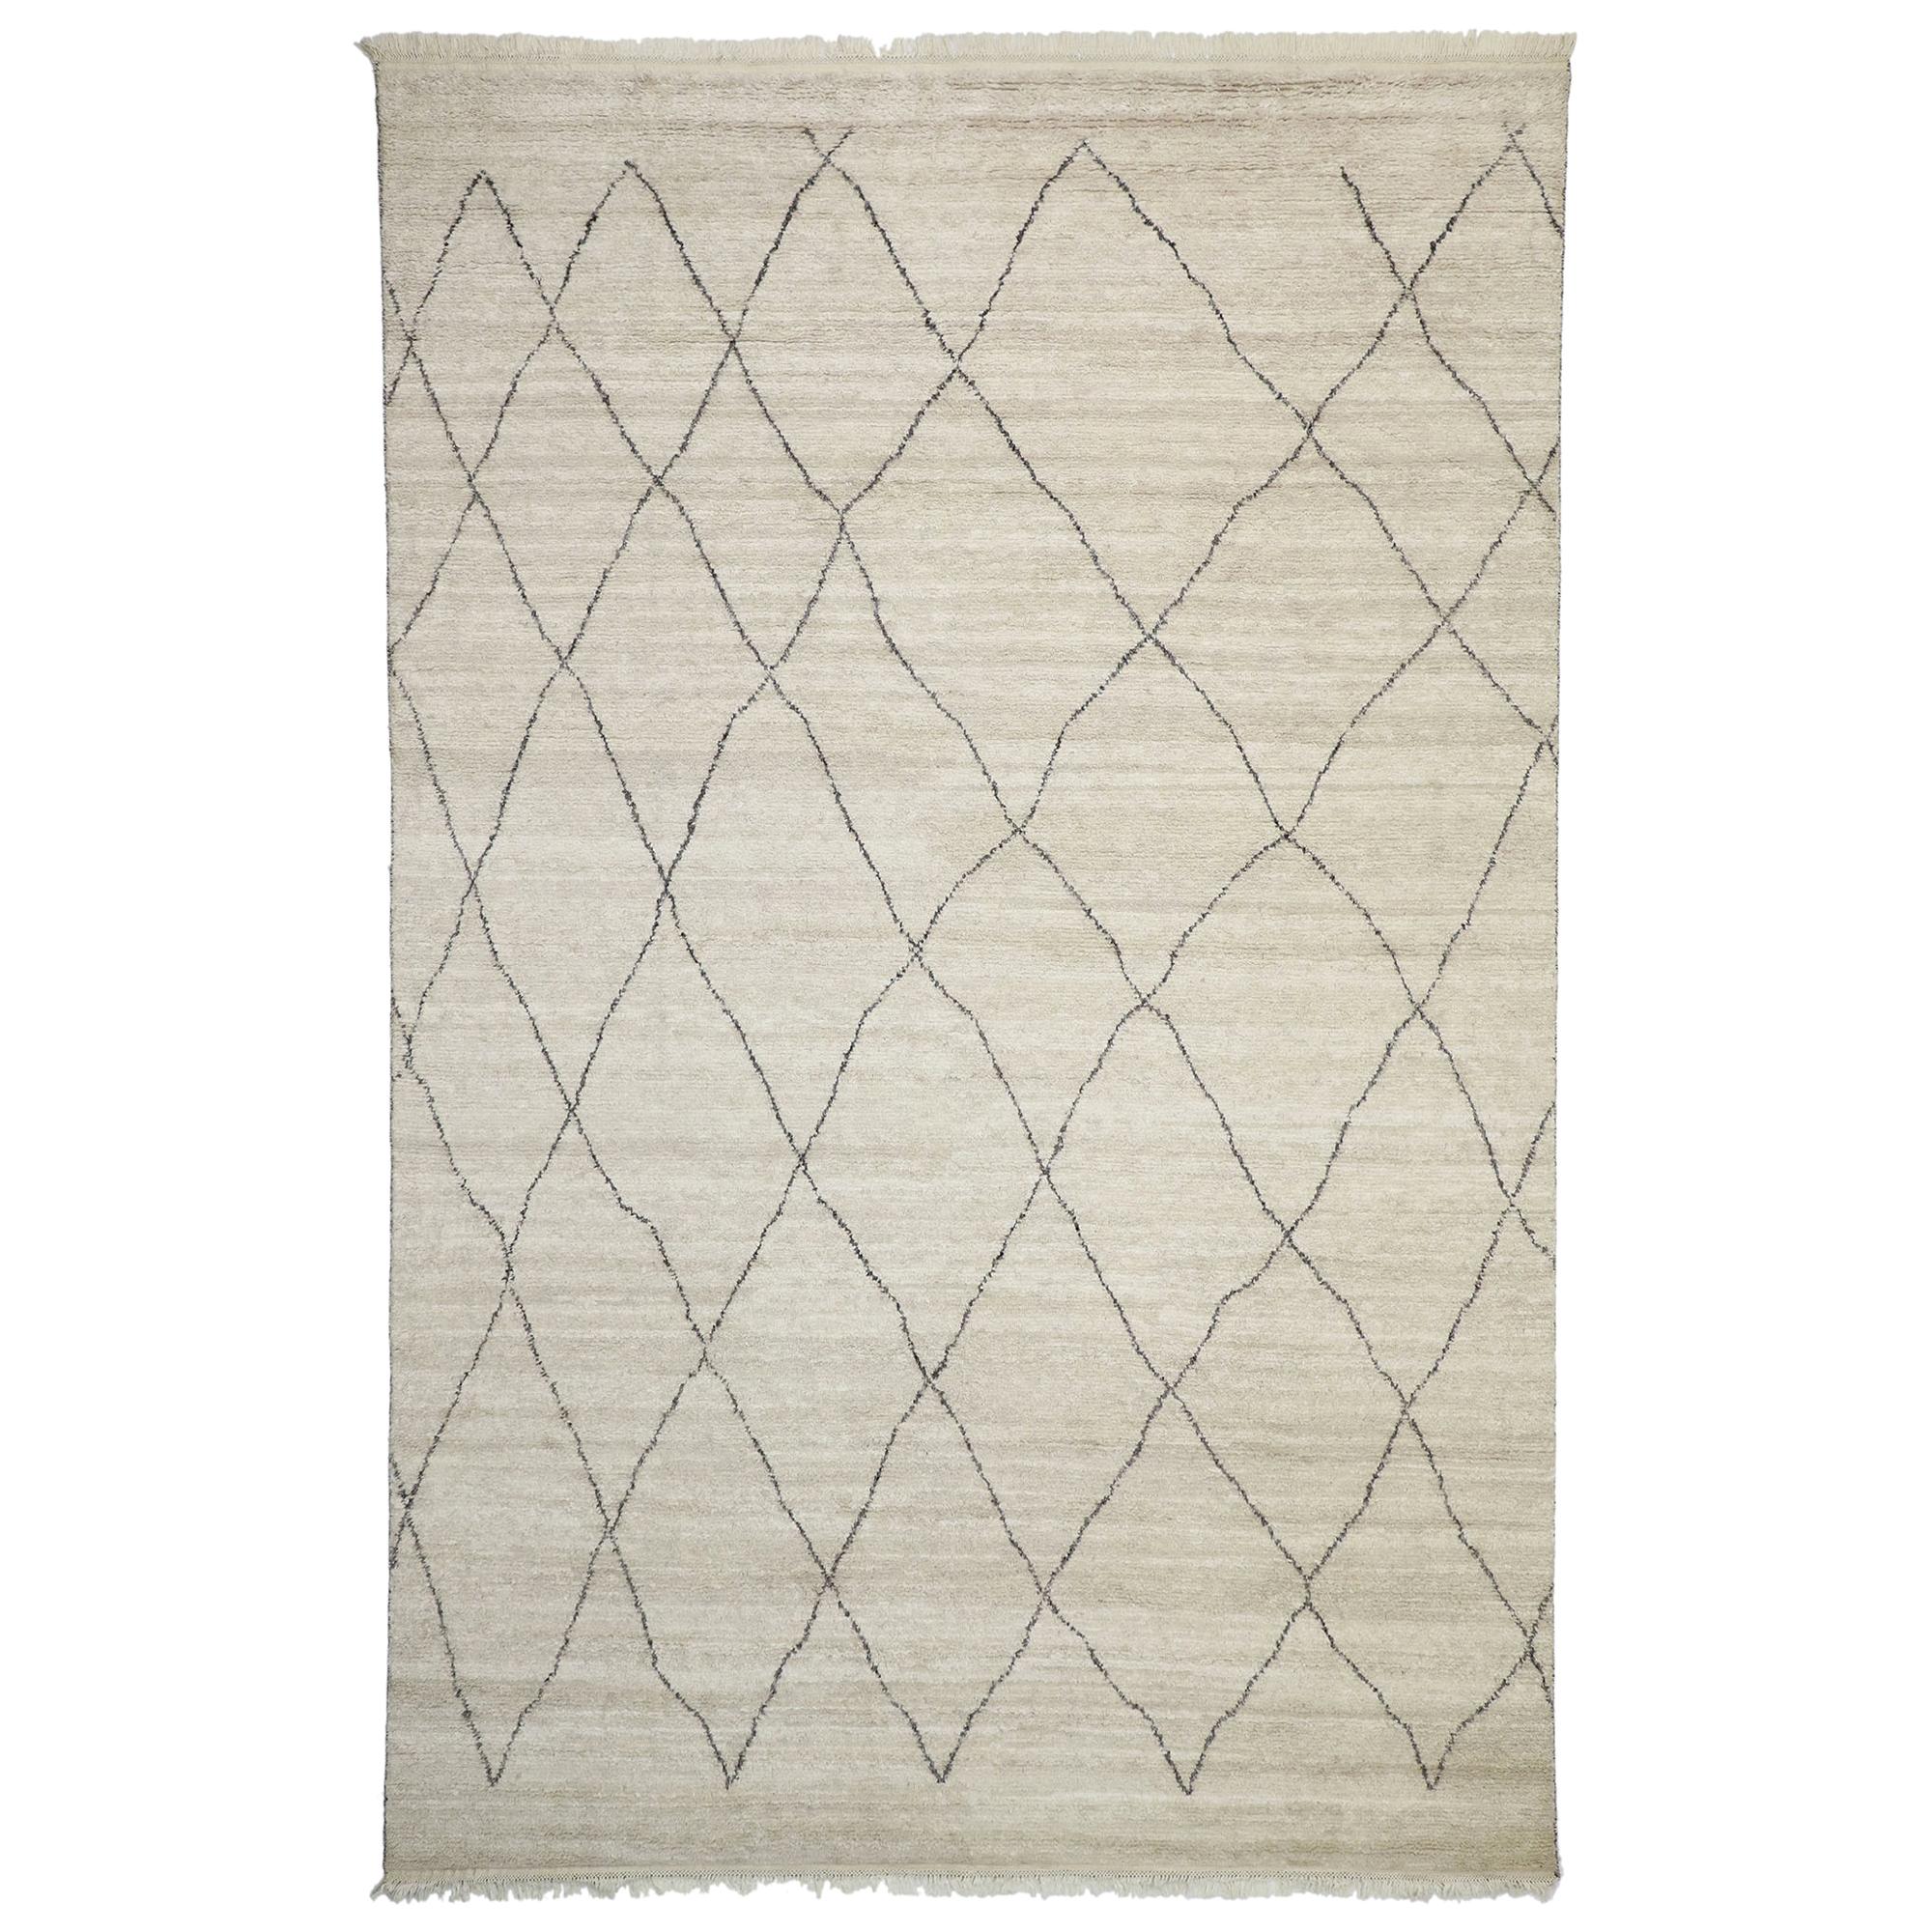 New Contemporary Moroccan Area Rug with Modernist Style and Hygge Vibes